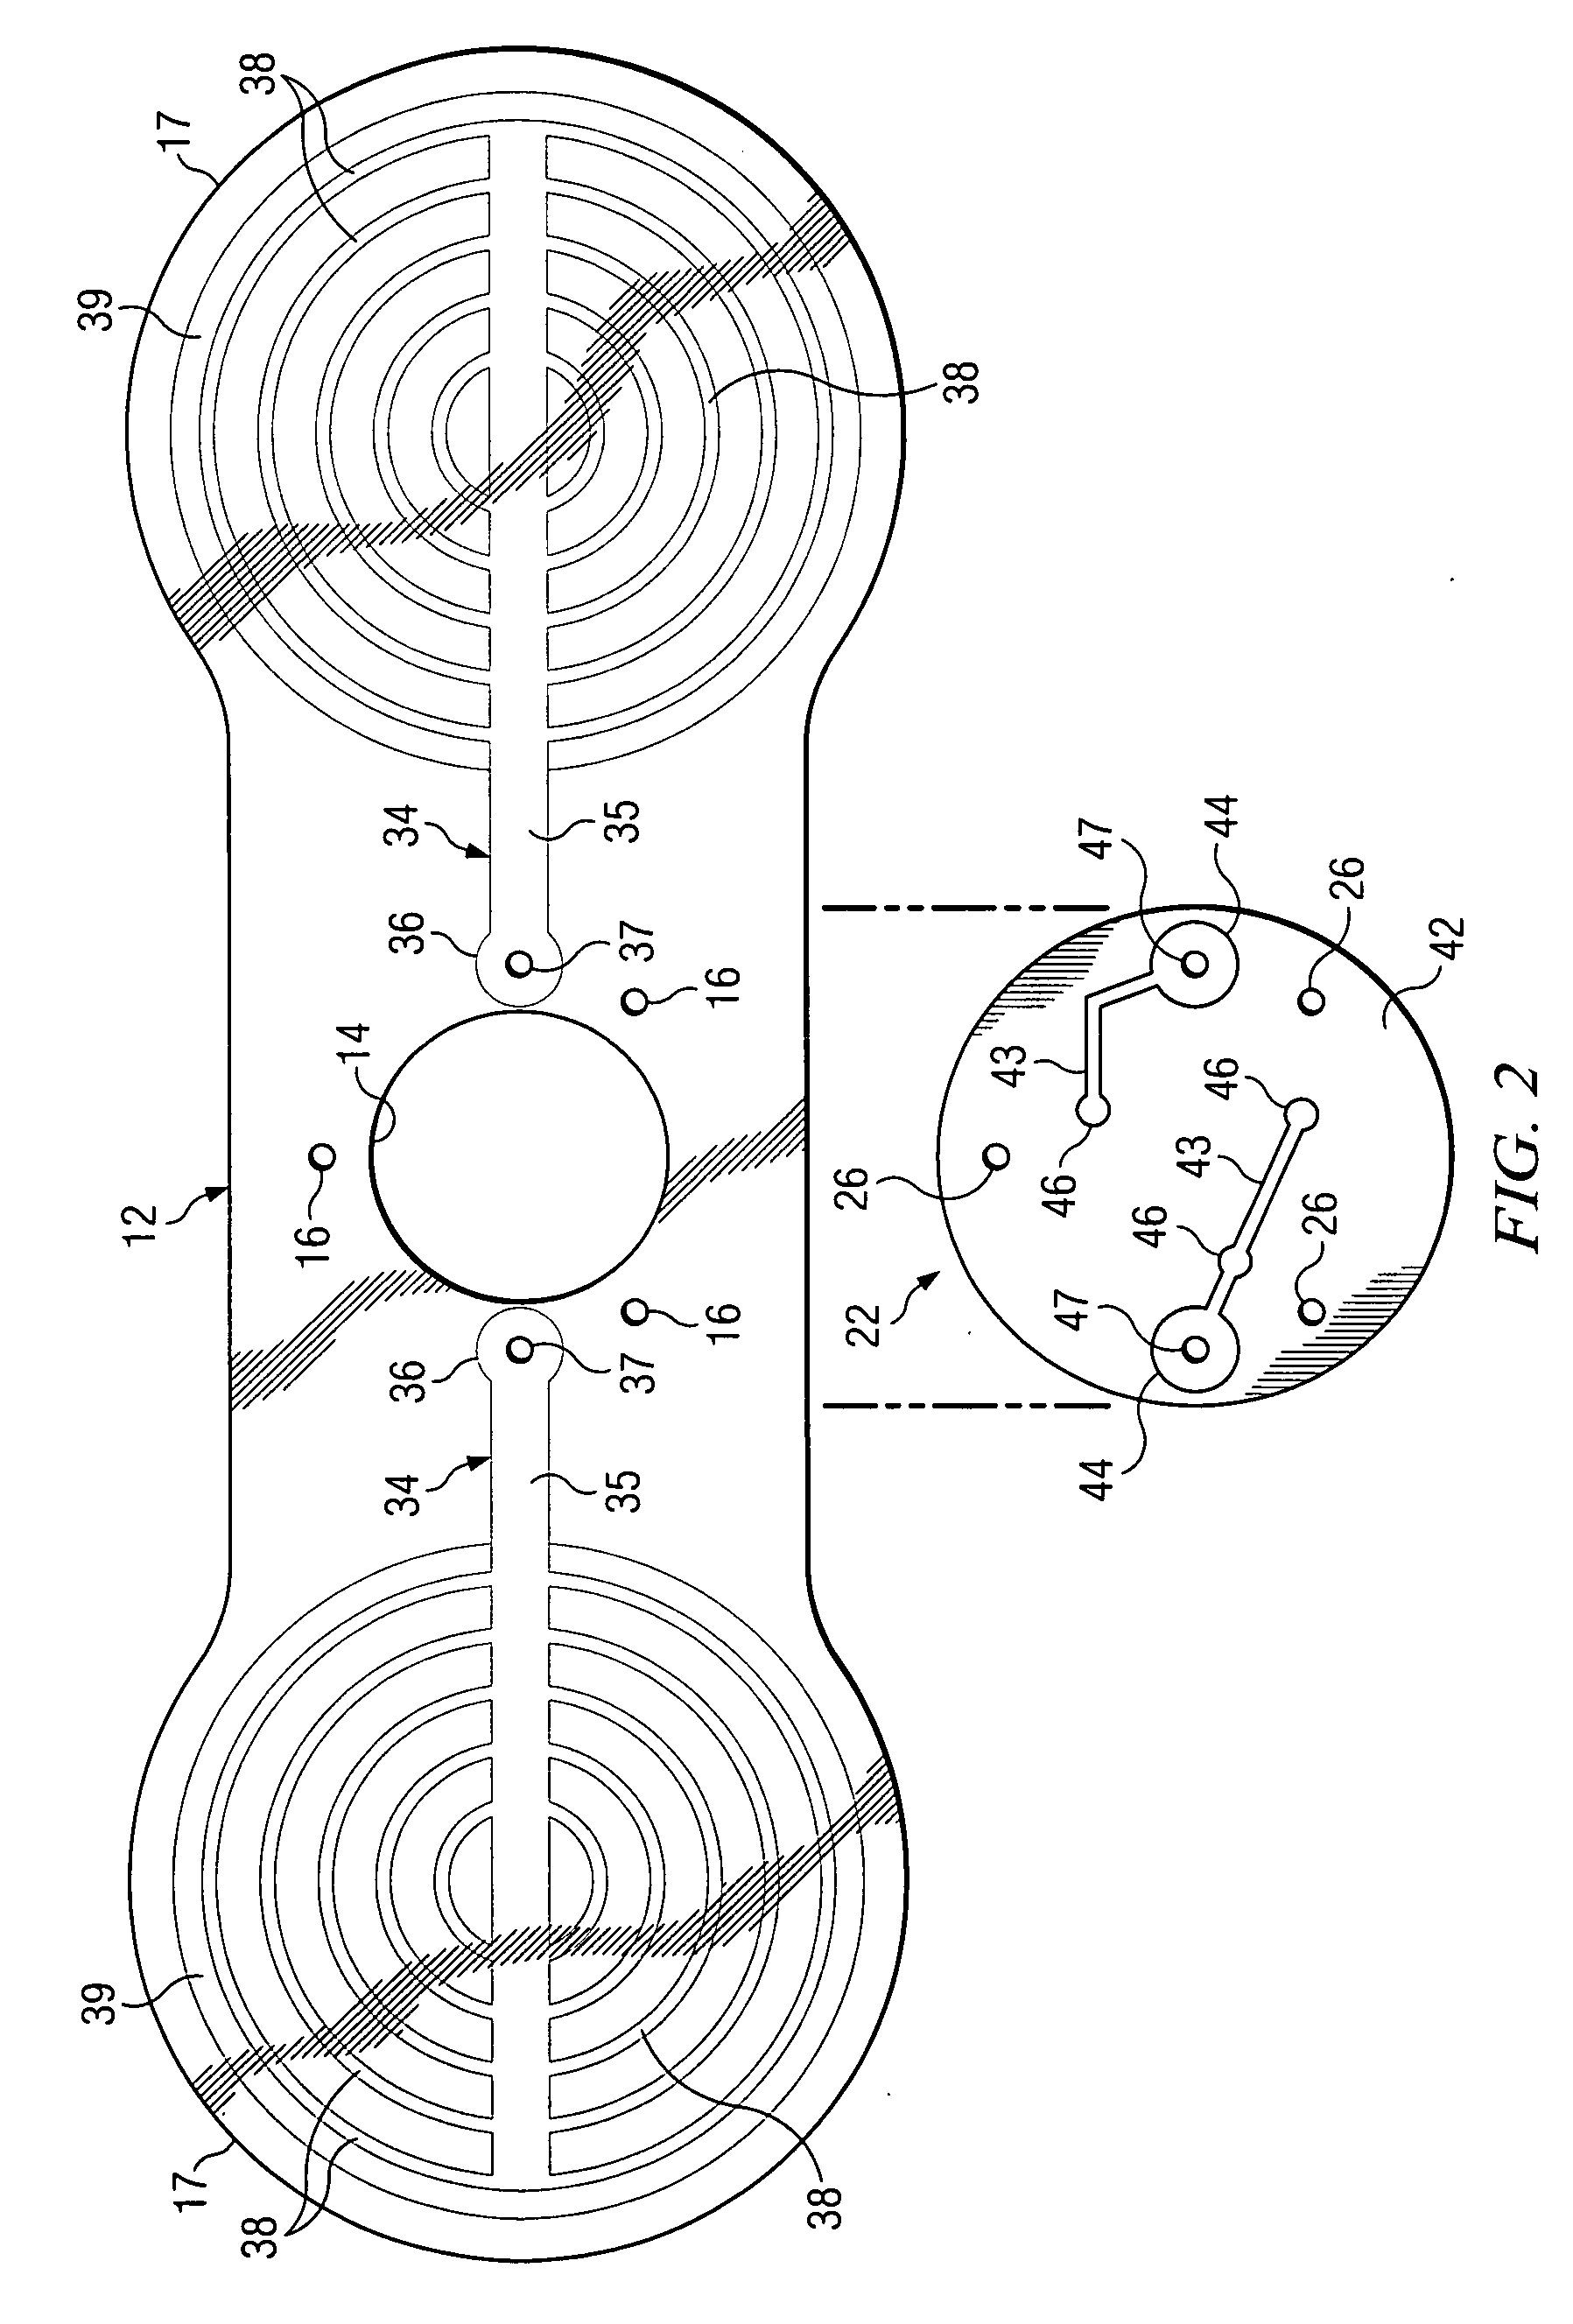 Conductive pad assembly for electrical therapy device